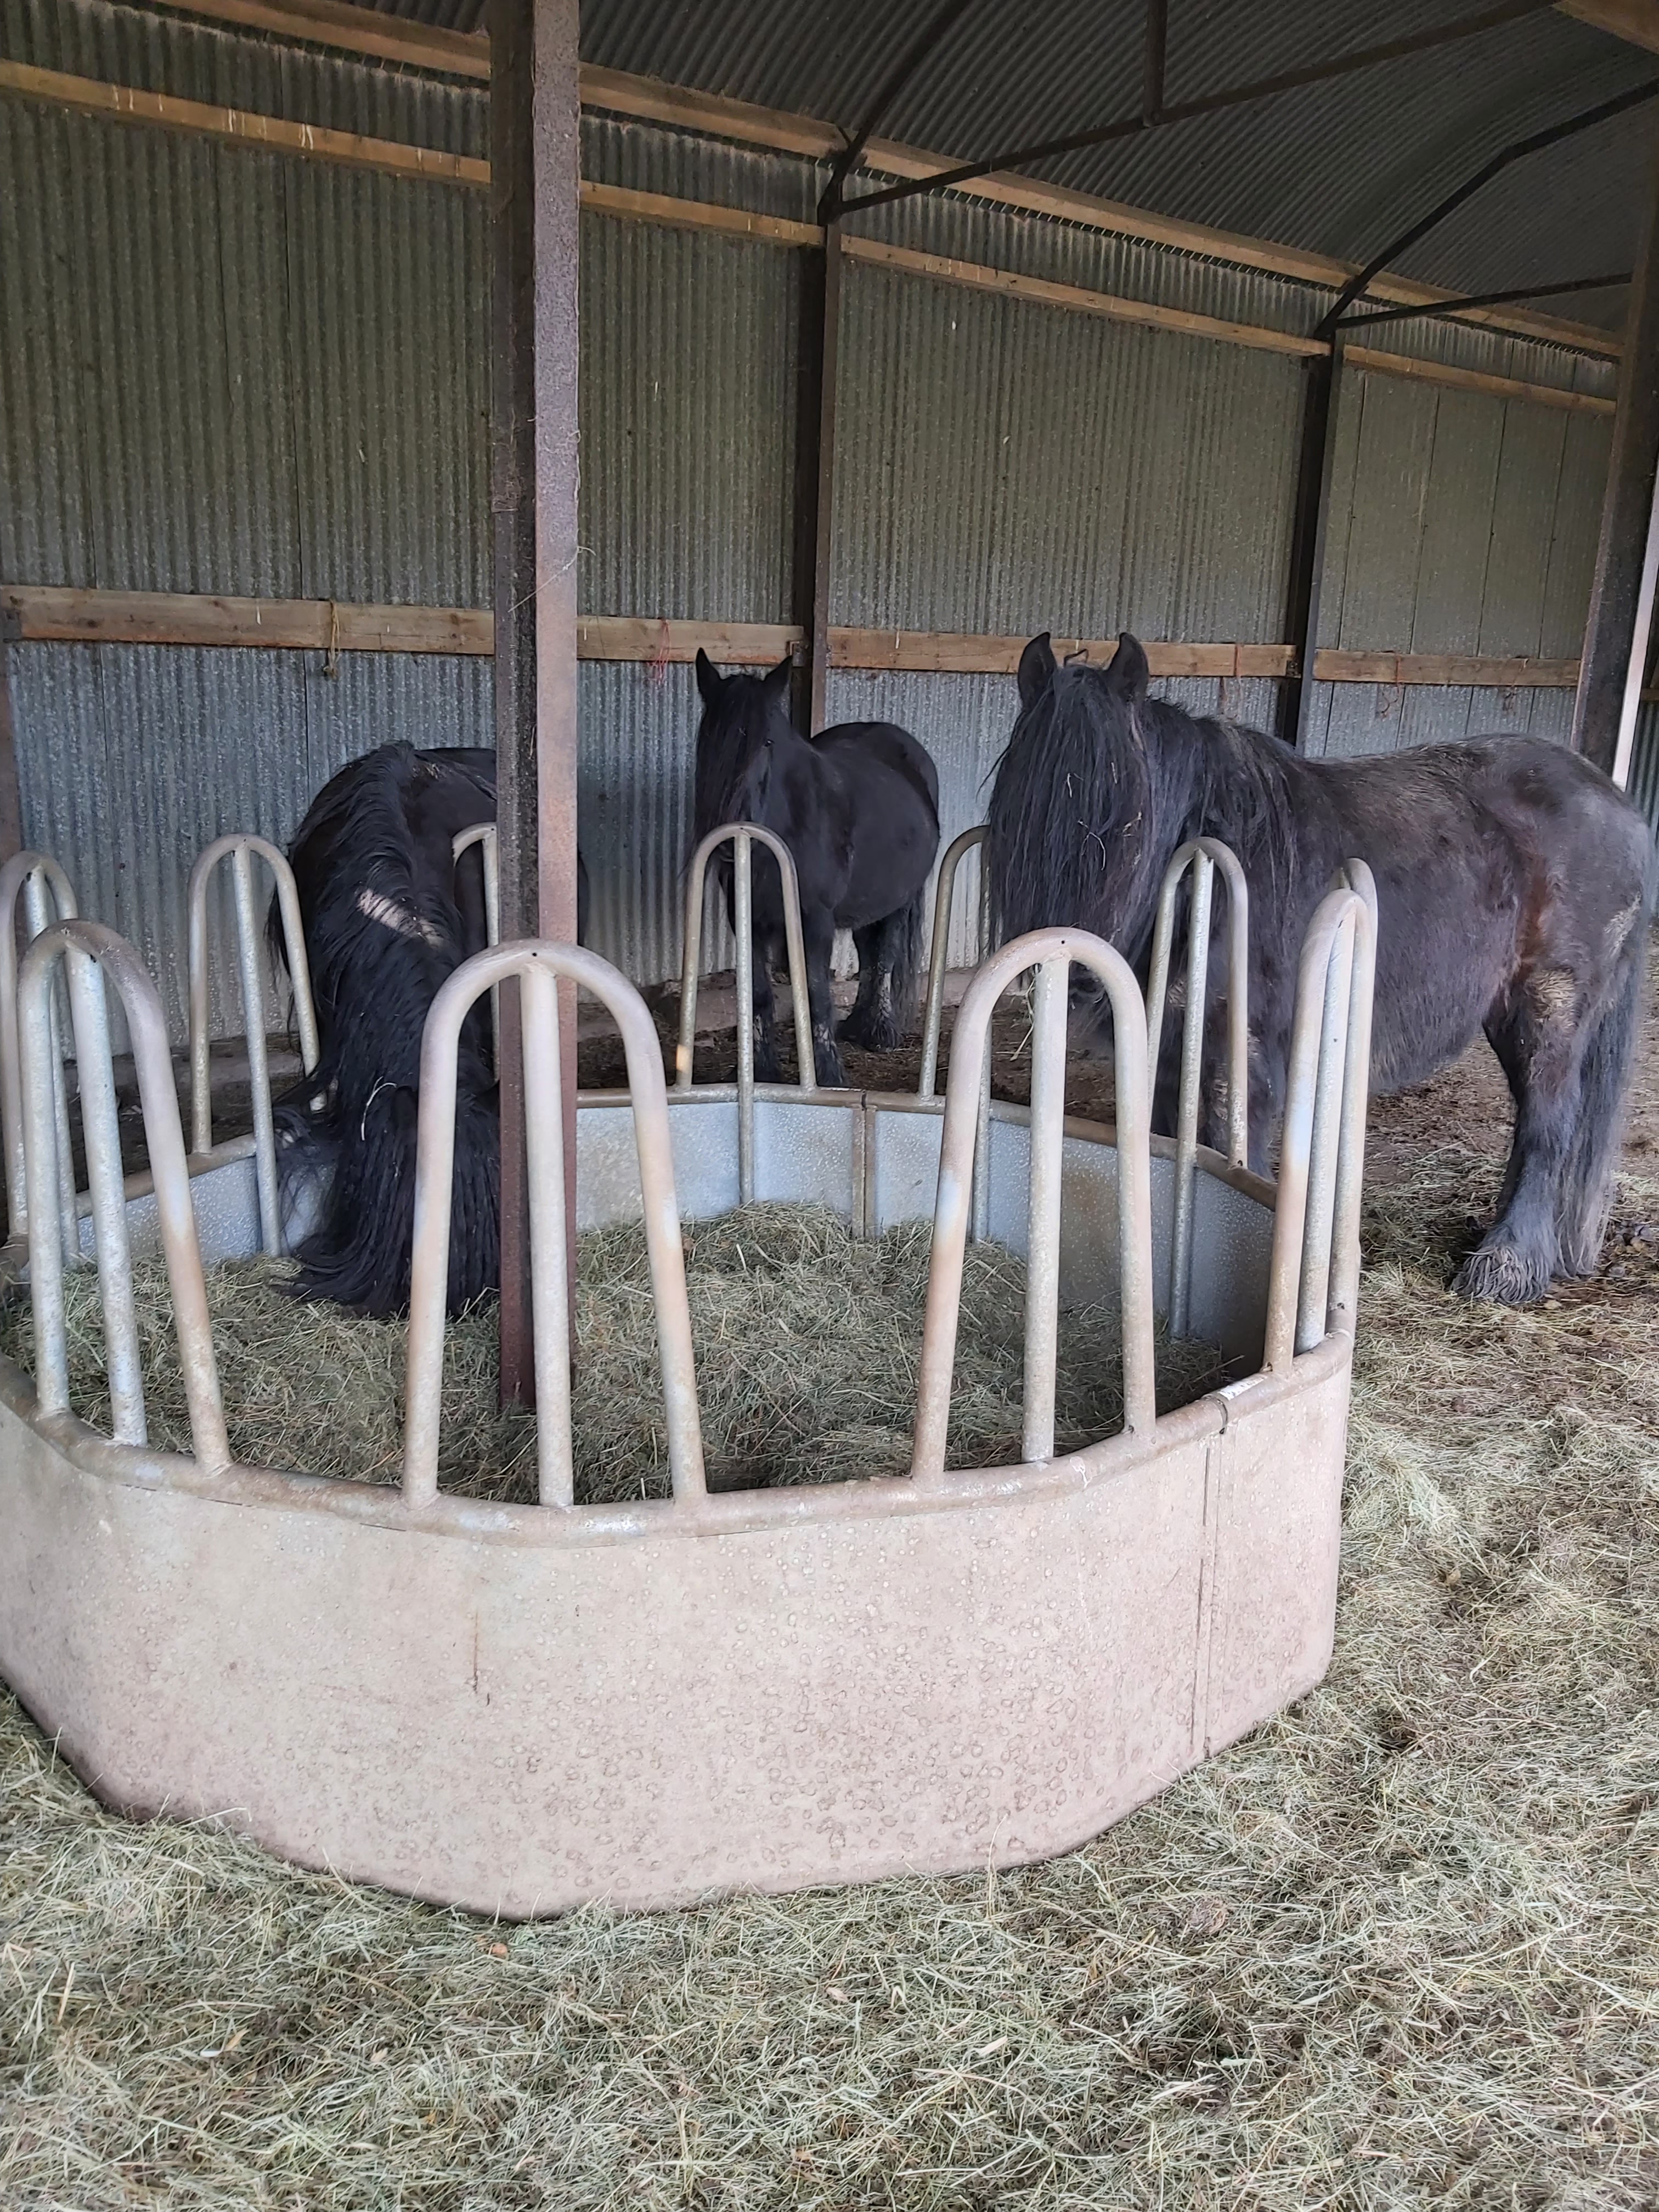 mares indoors round a ring-feeder